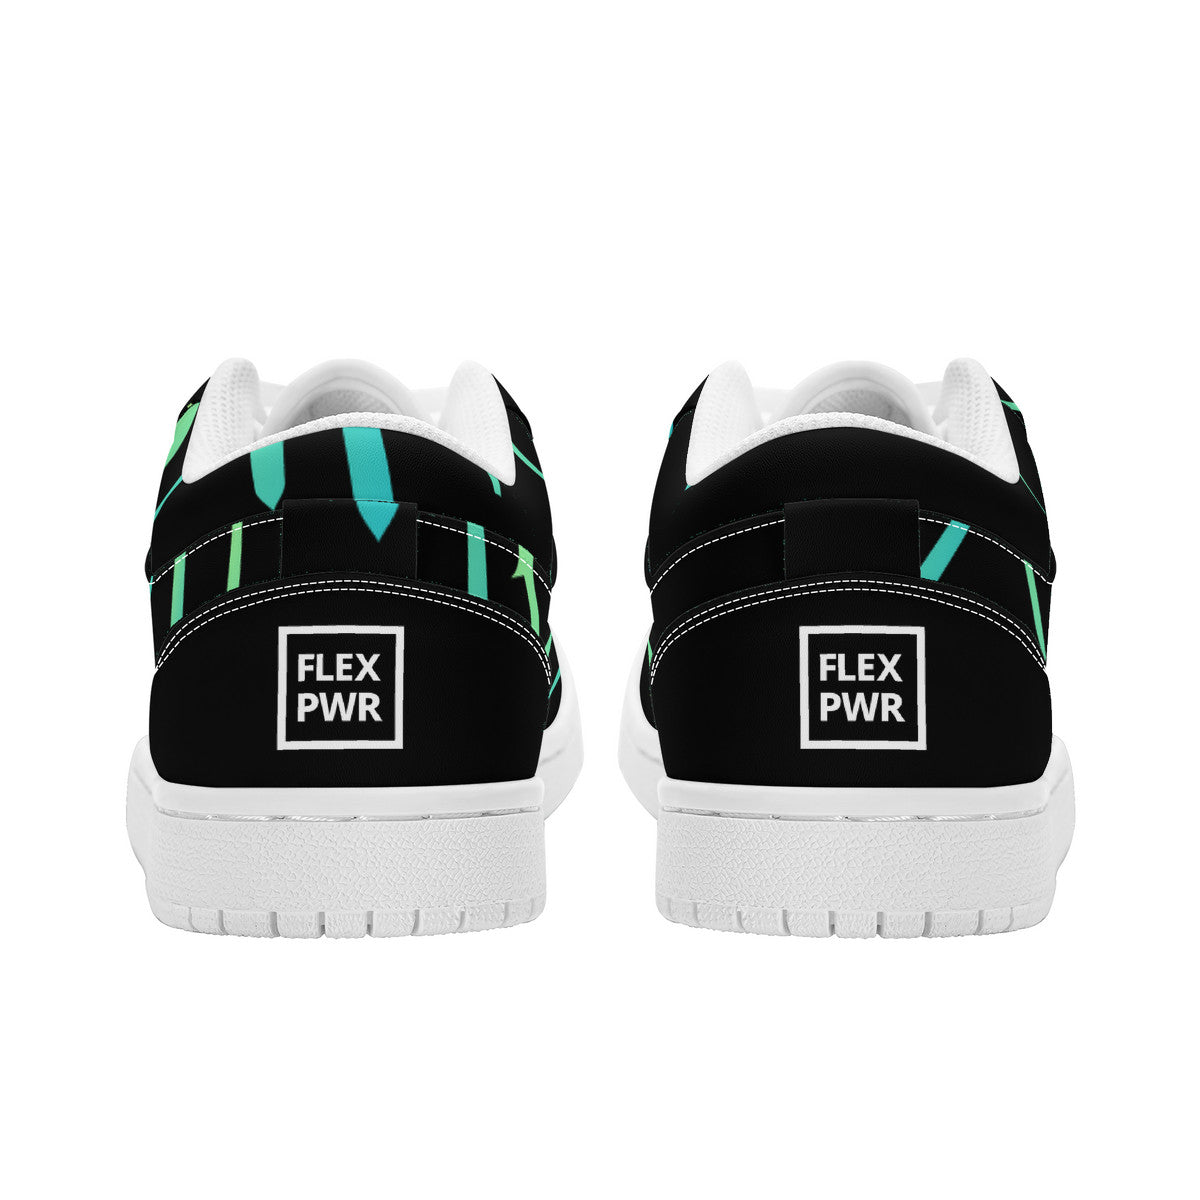 Flex Power | Customized Business Shoes V2 Sneakers